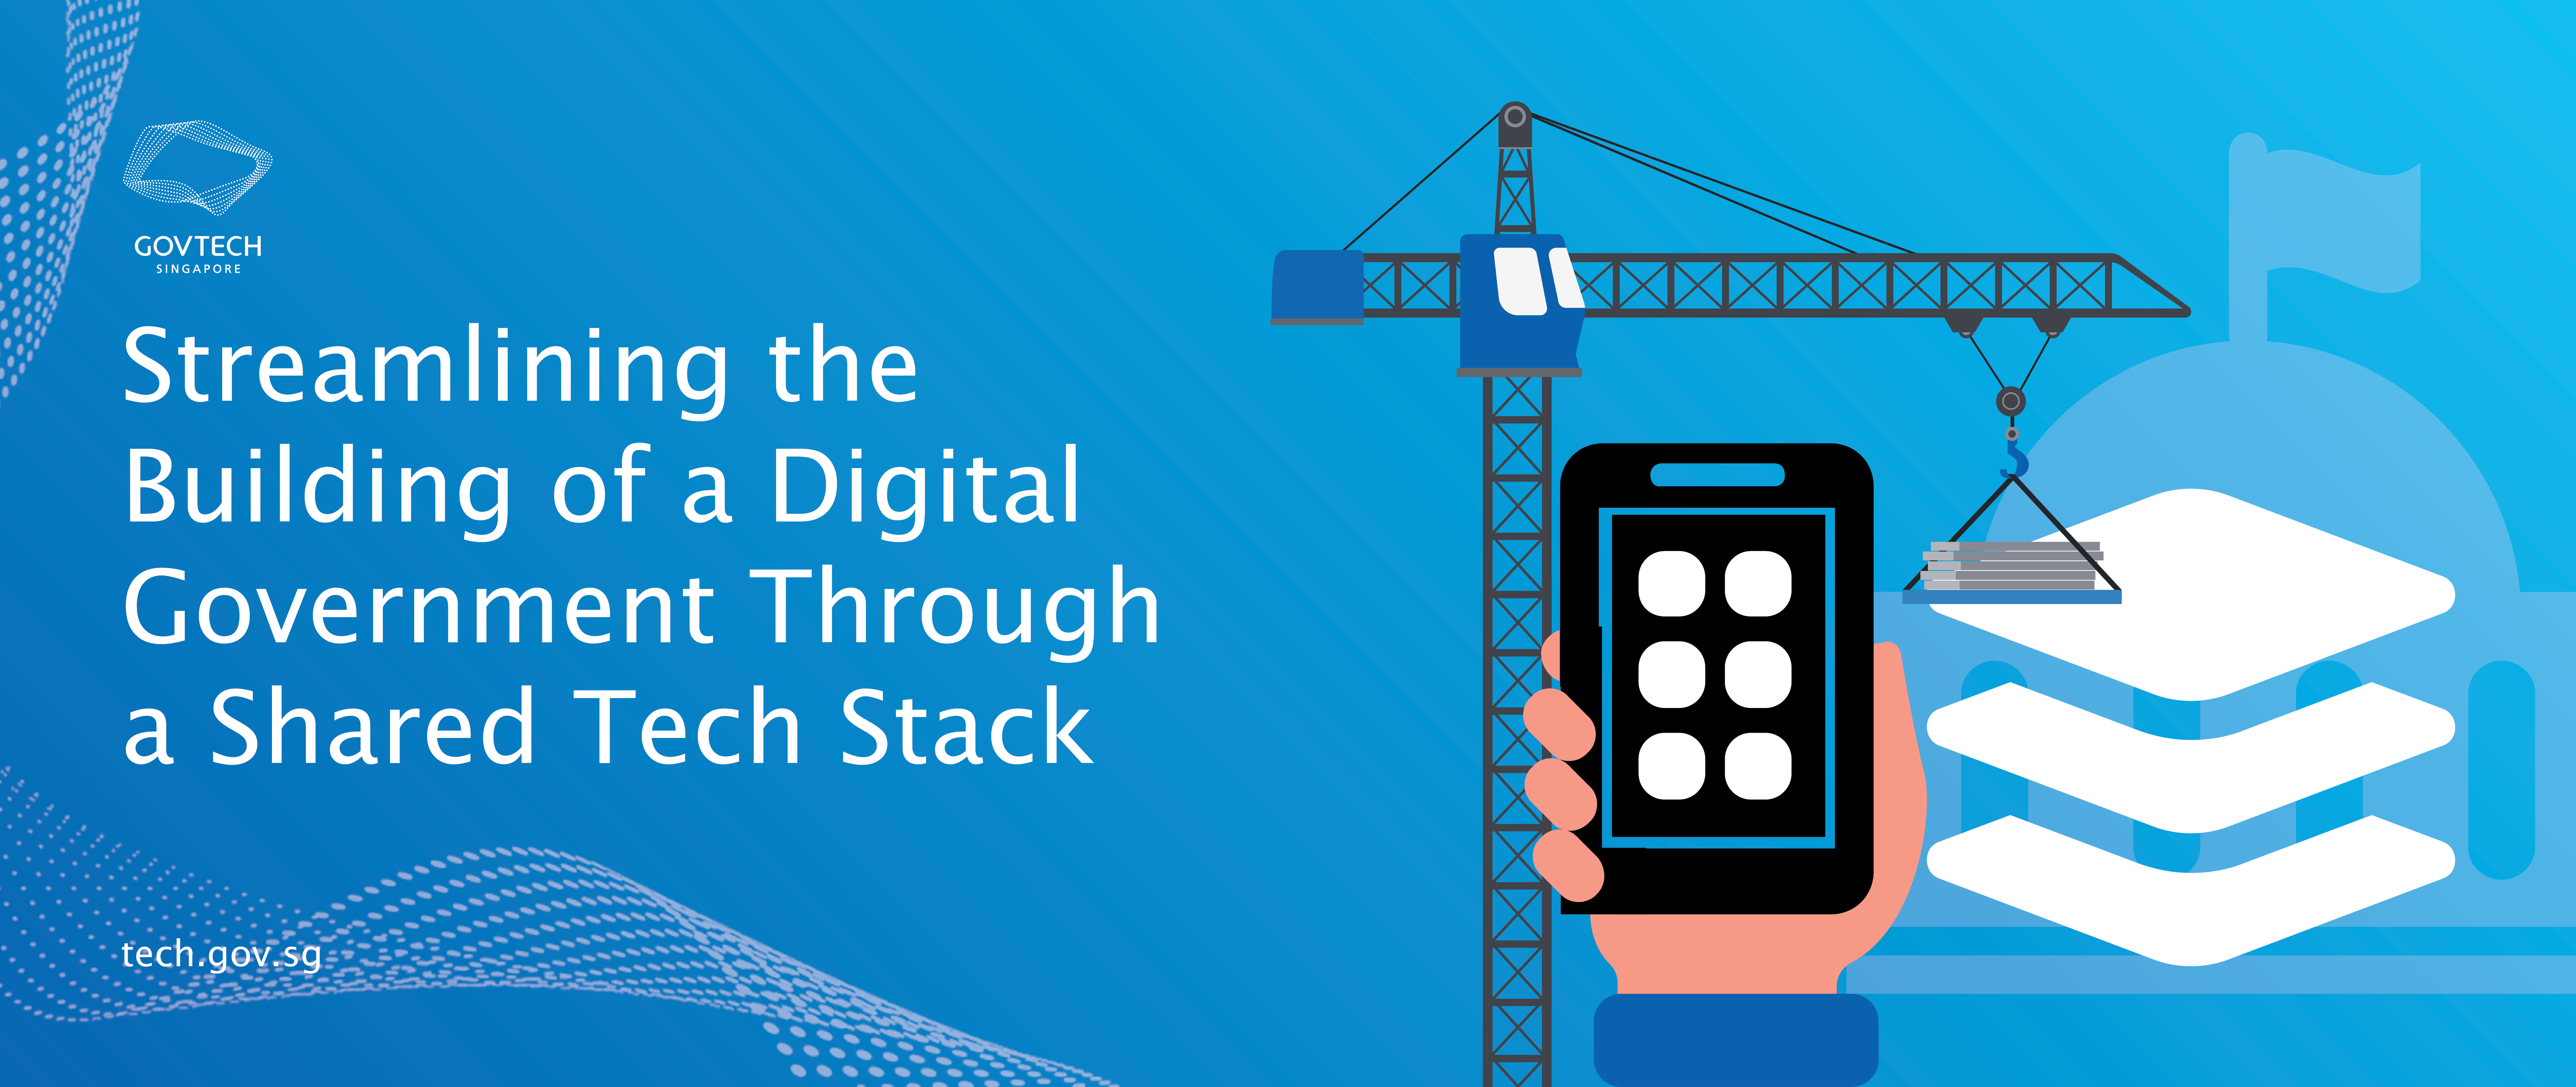 Streamlining the Building of a Digital Government Through a Shared Tech Stack